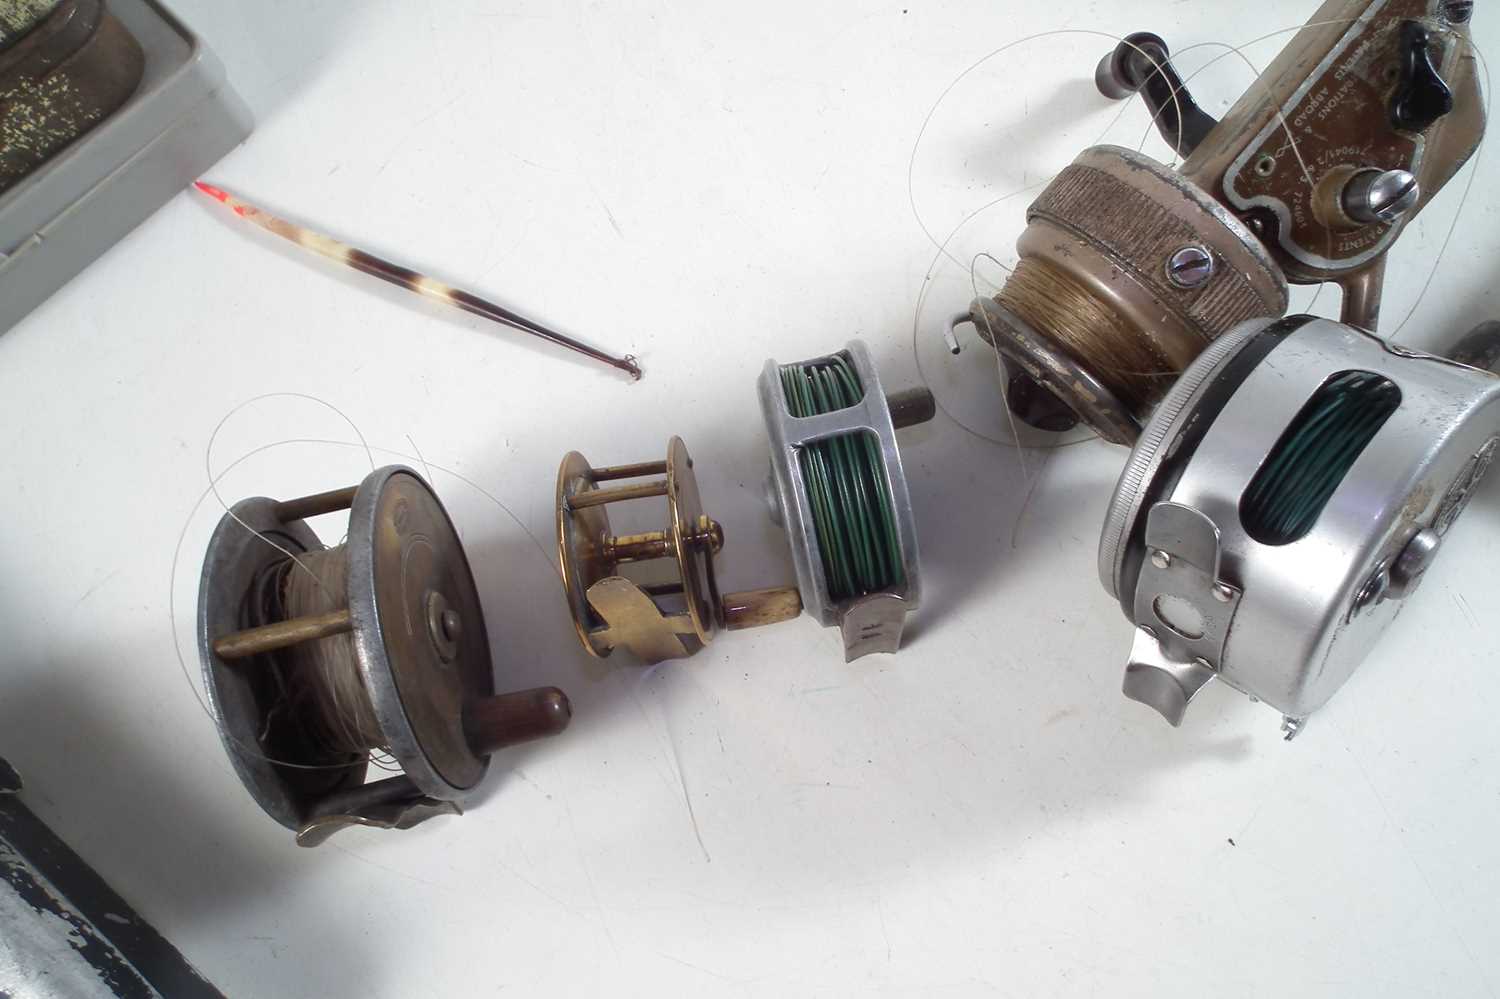 Two Hardy reels and related fishing vintage tackle - Image 15 of 21